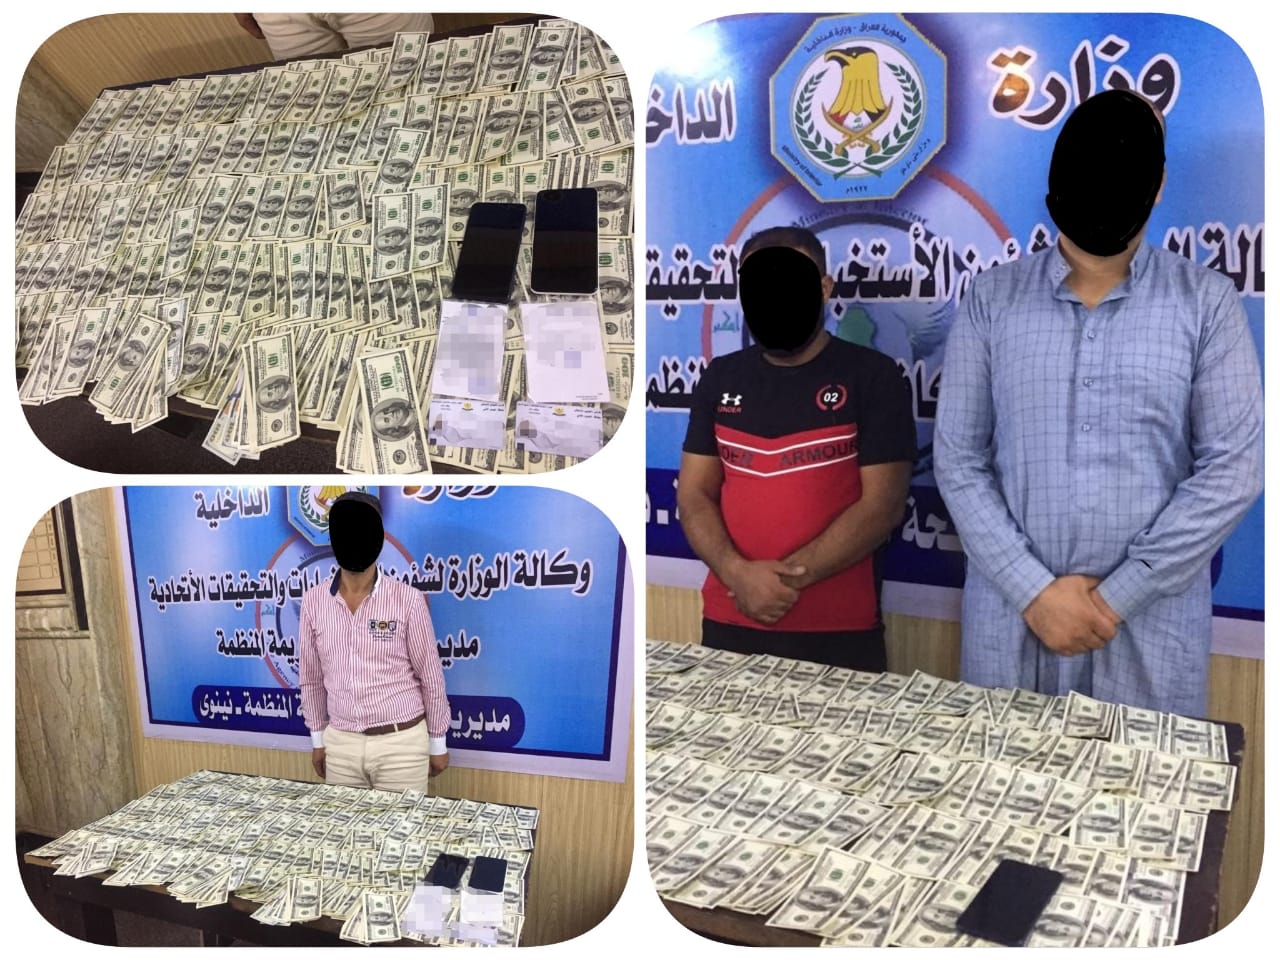 Two counterfeiting gangs arrested in Nineveh